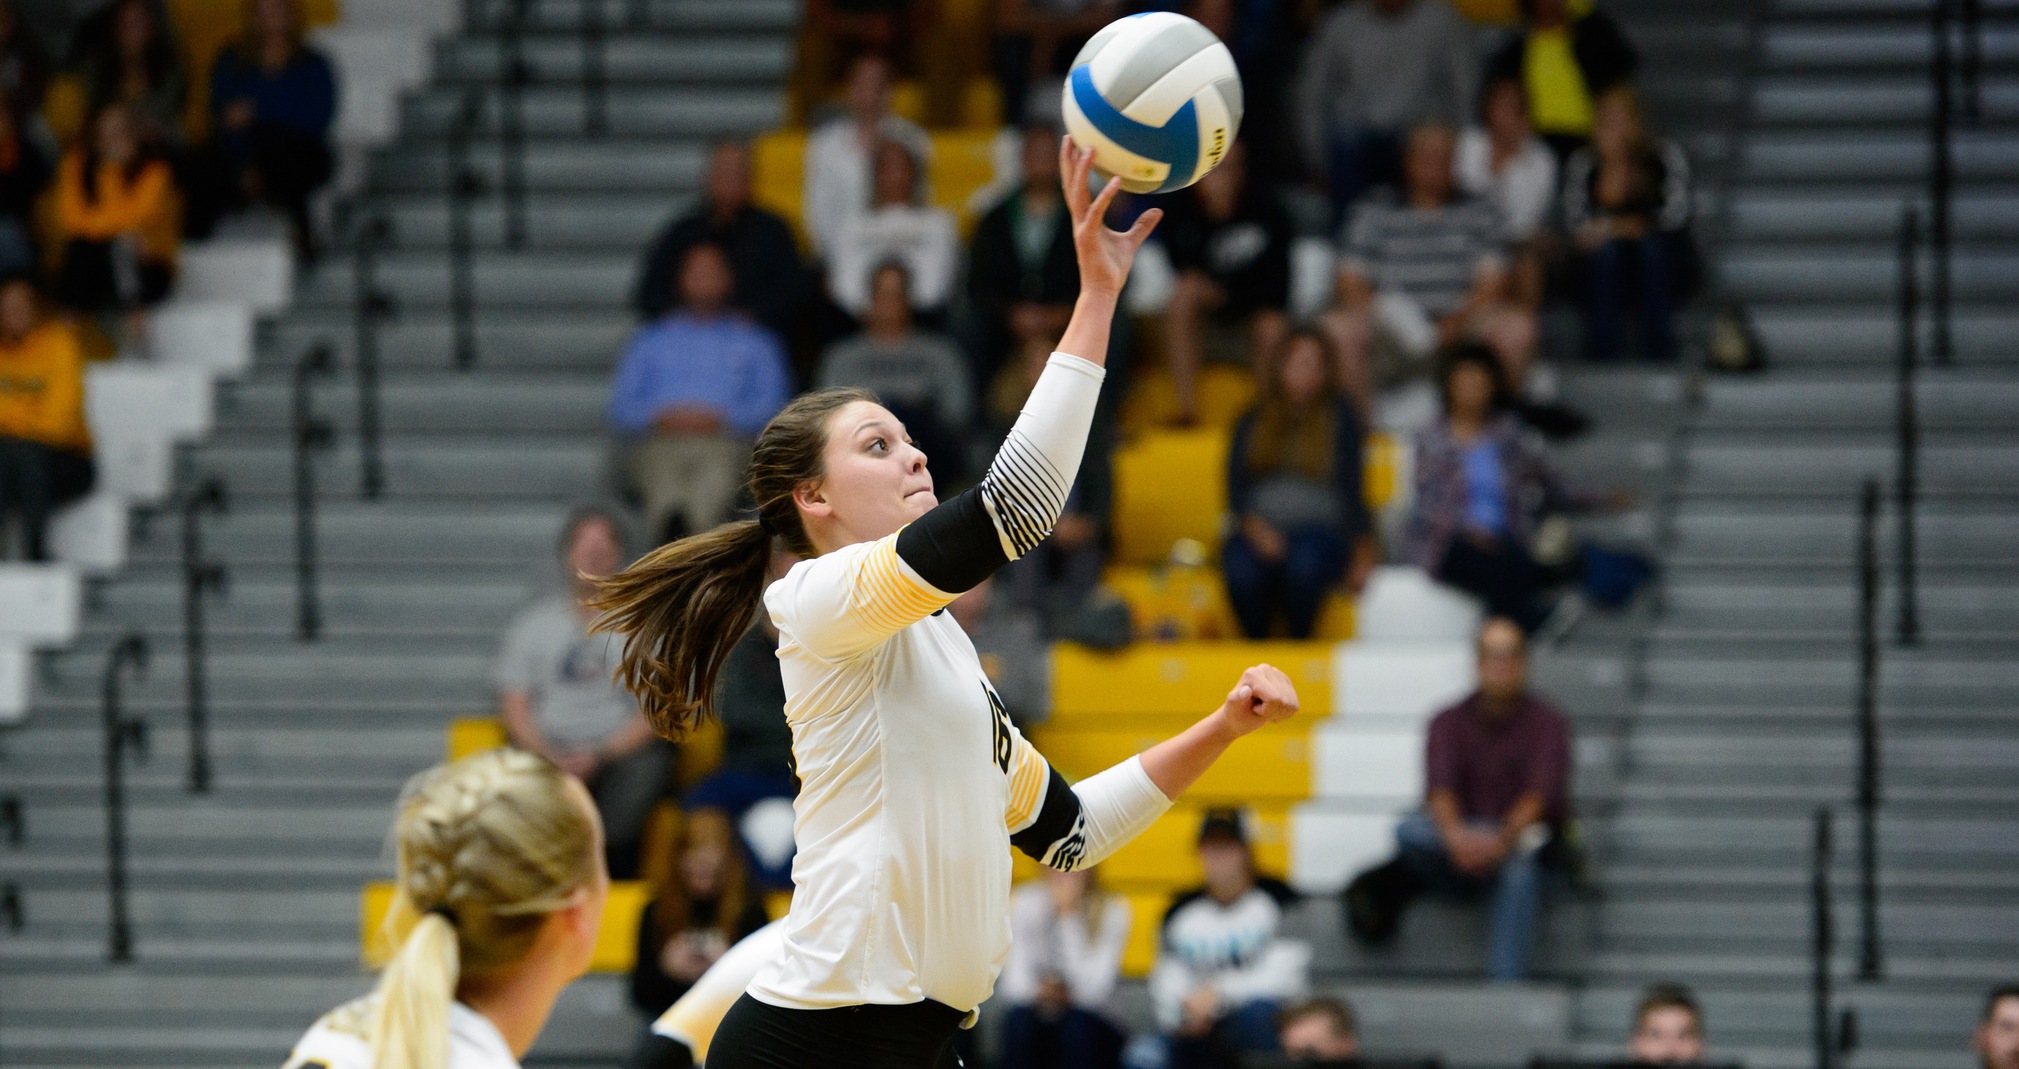 Carly Lemke hit .458 with 12 kills and three digs against Wheaton College.